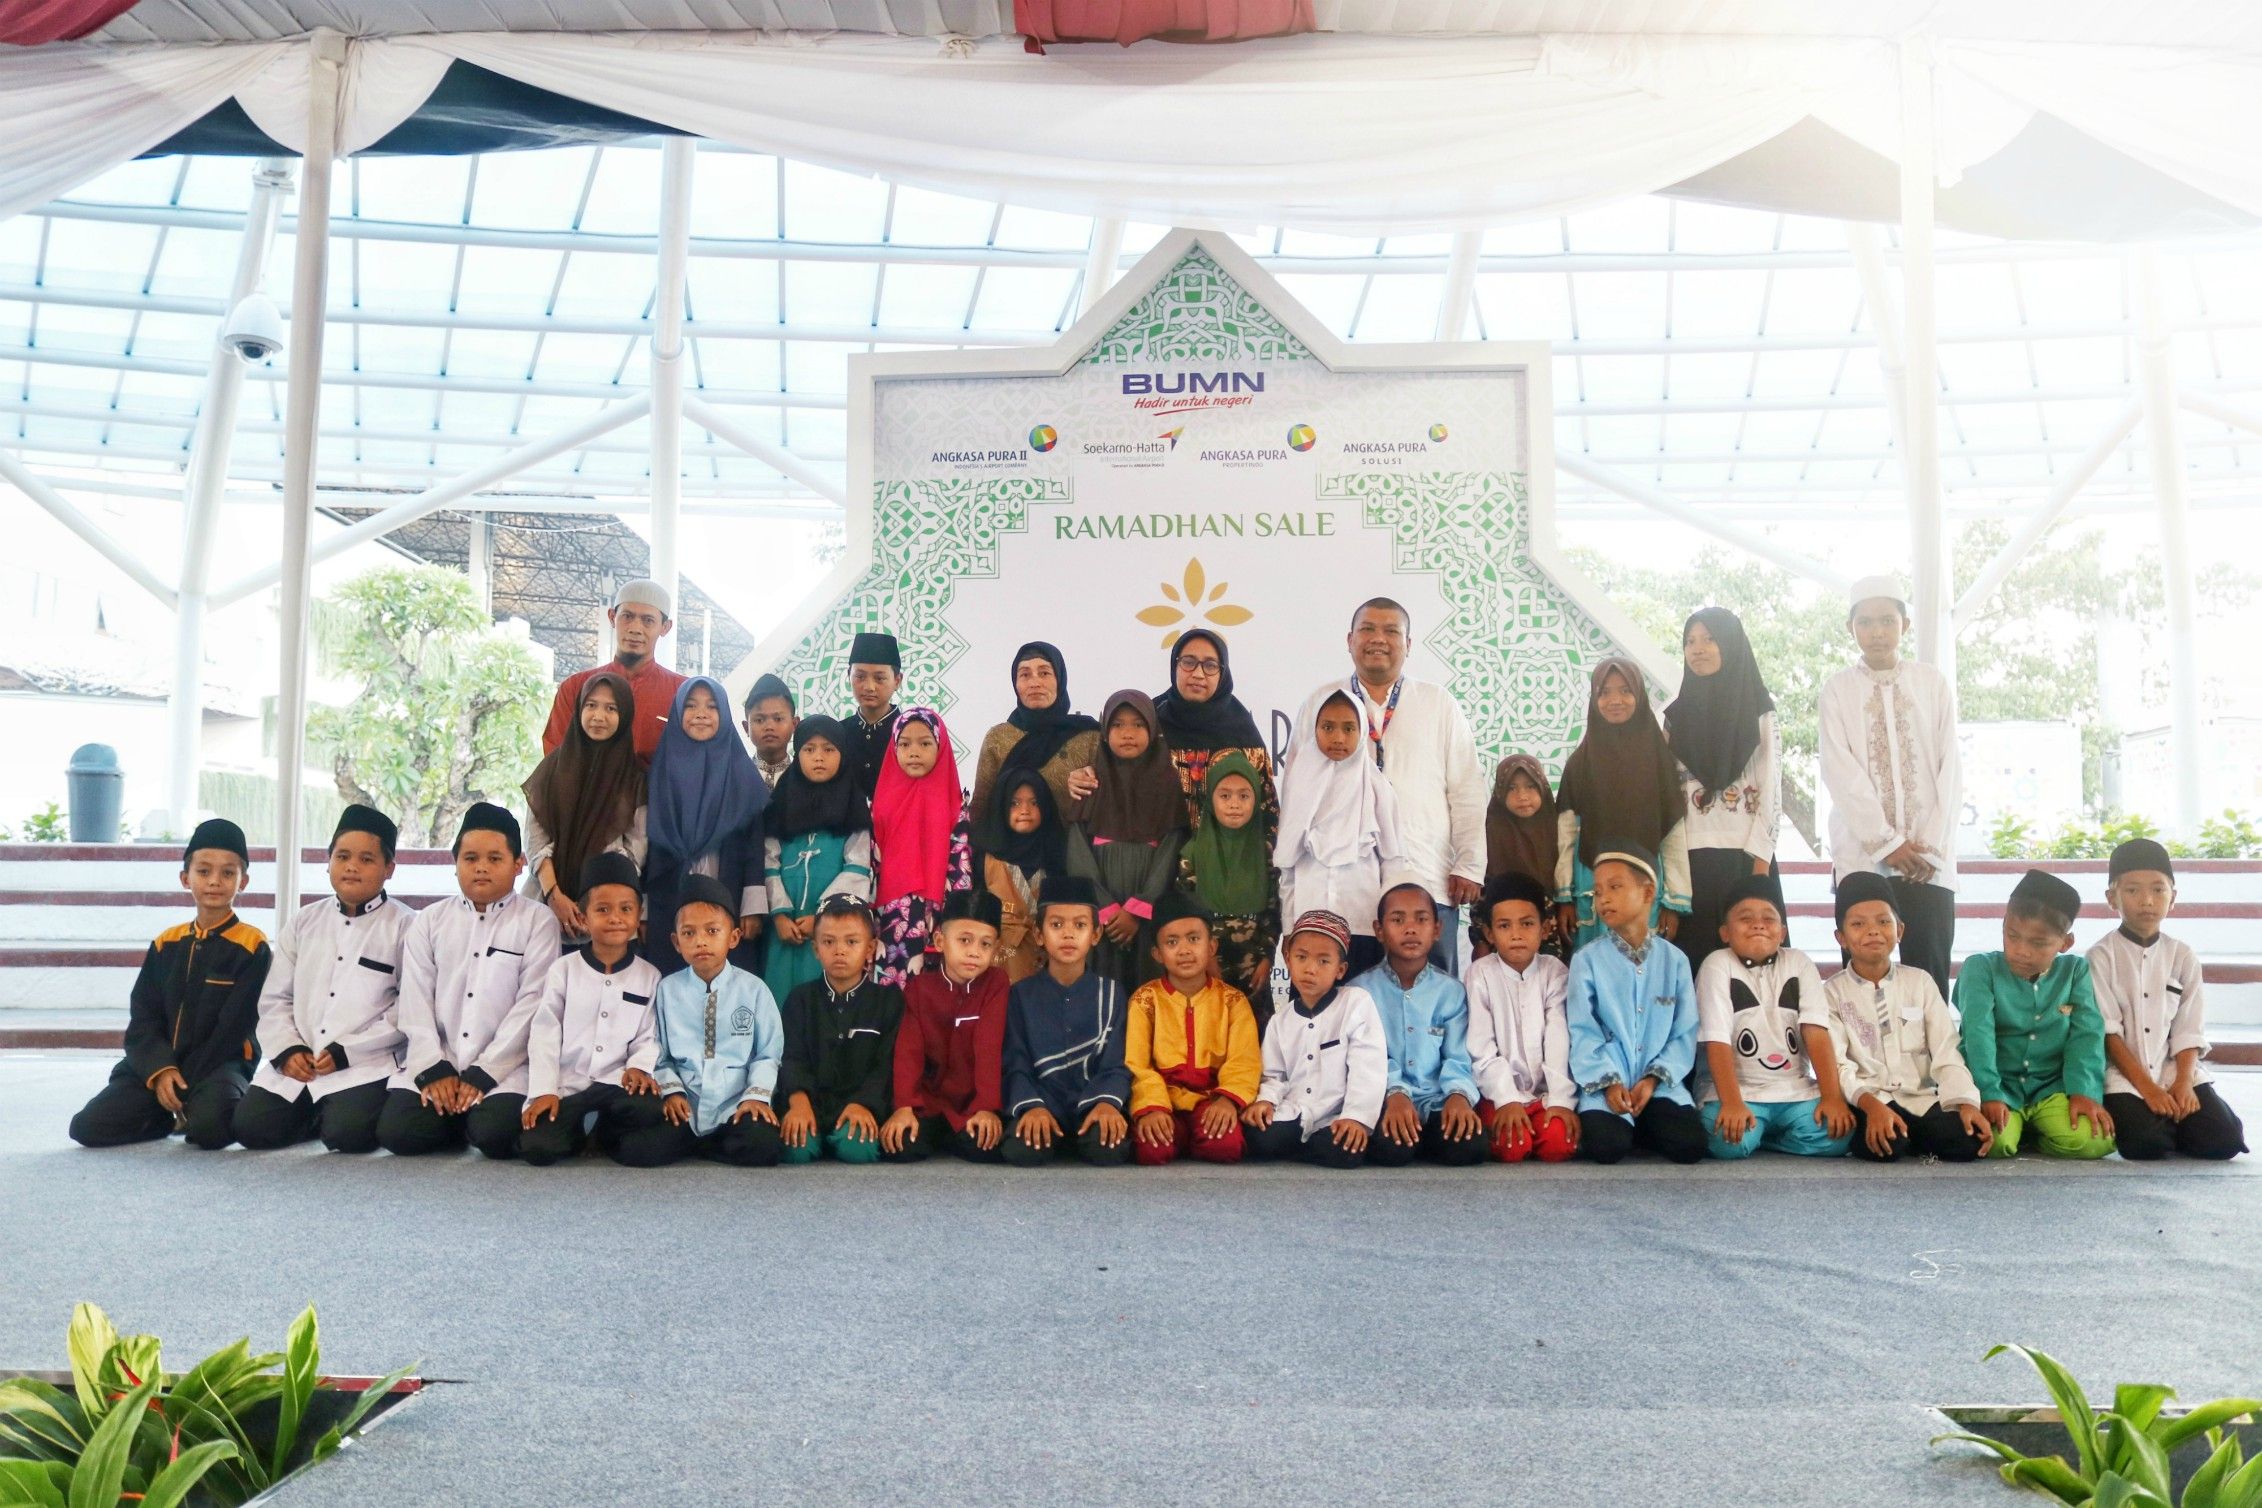  invite orphans, pt angkasa pura solusi to hold iftar dinner (break a fast) event